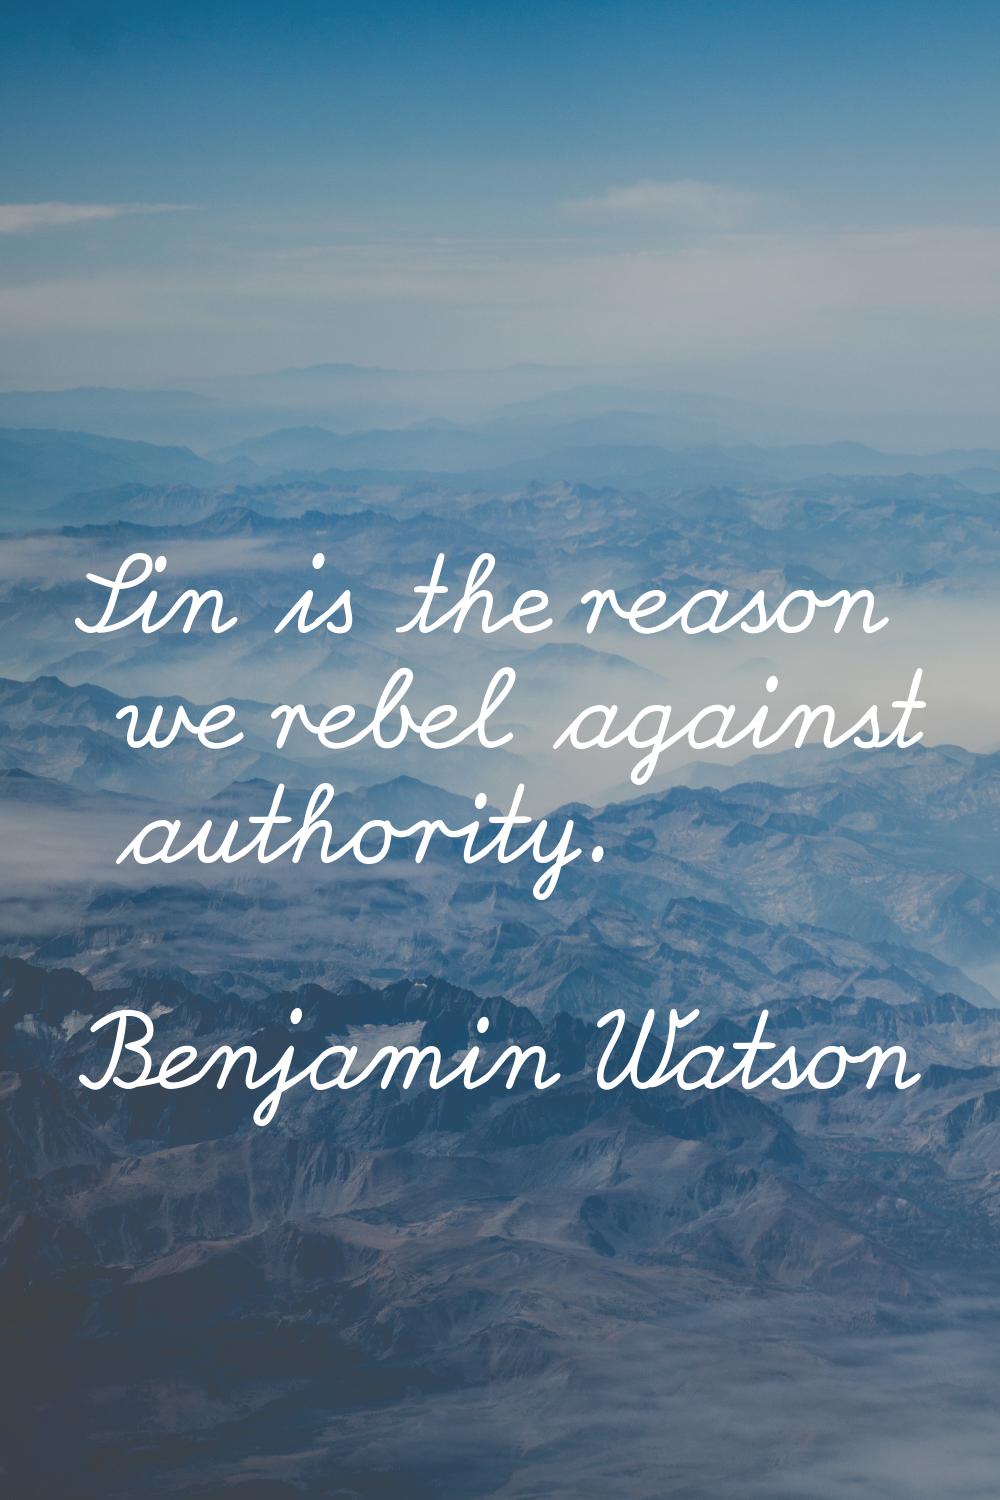 Sin is the reason we rebel against authority.